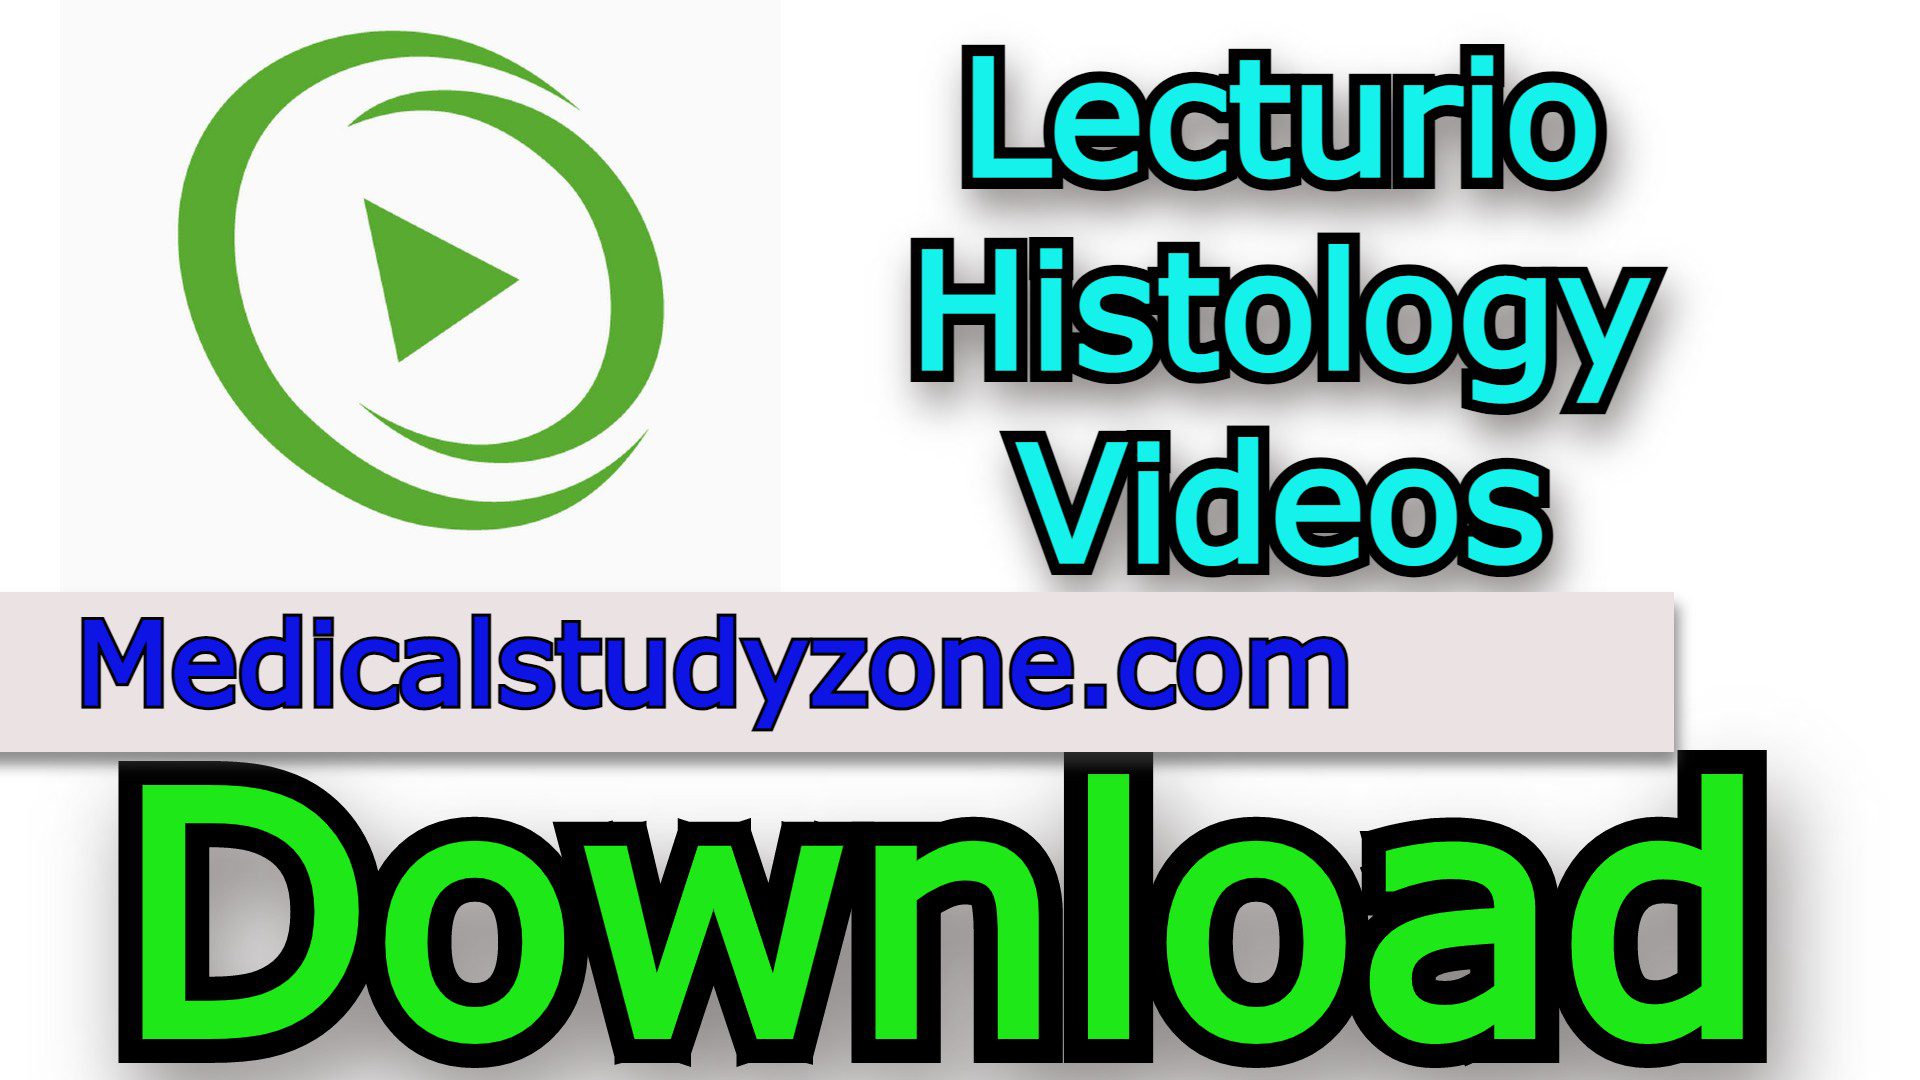 Lecturio Histology Videos 2022 Free Download